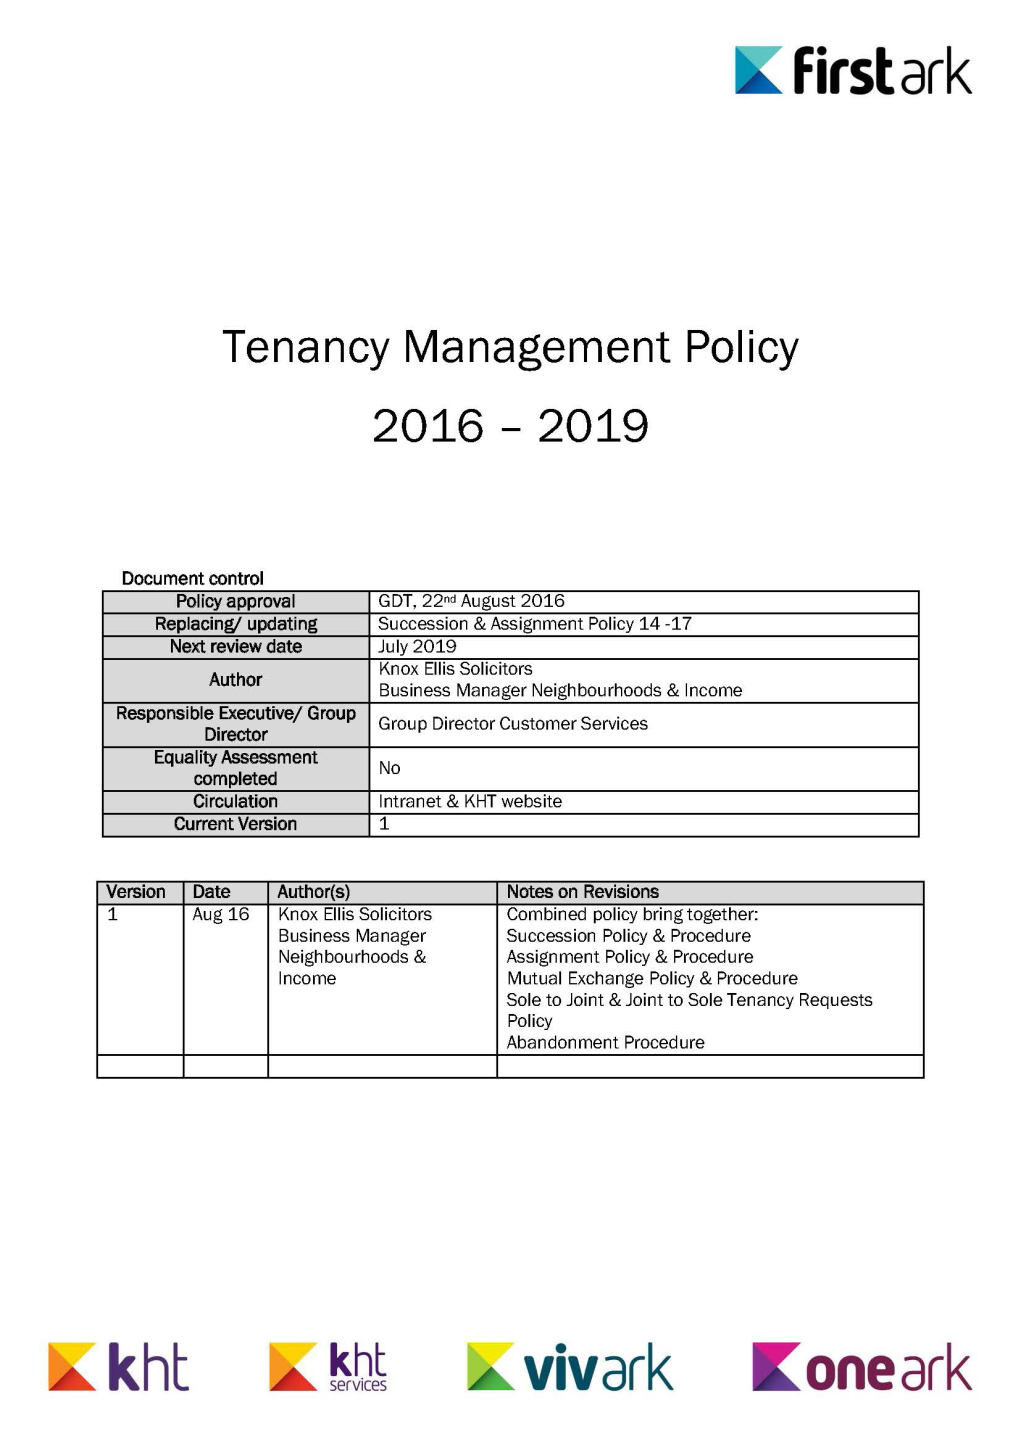 Tenancy Management Policy 2016